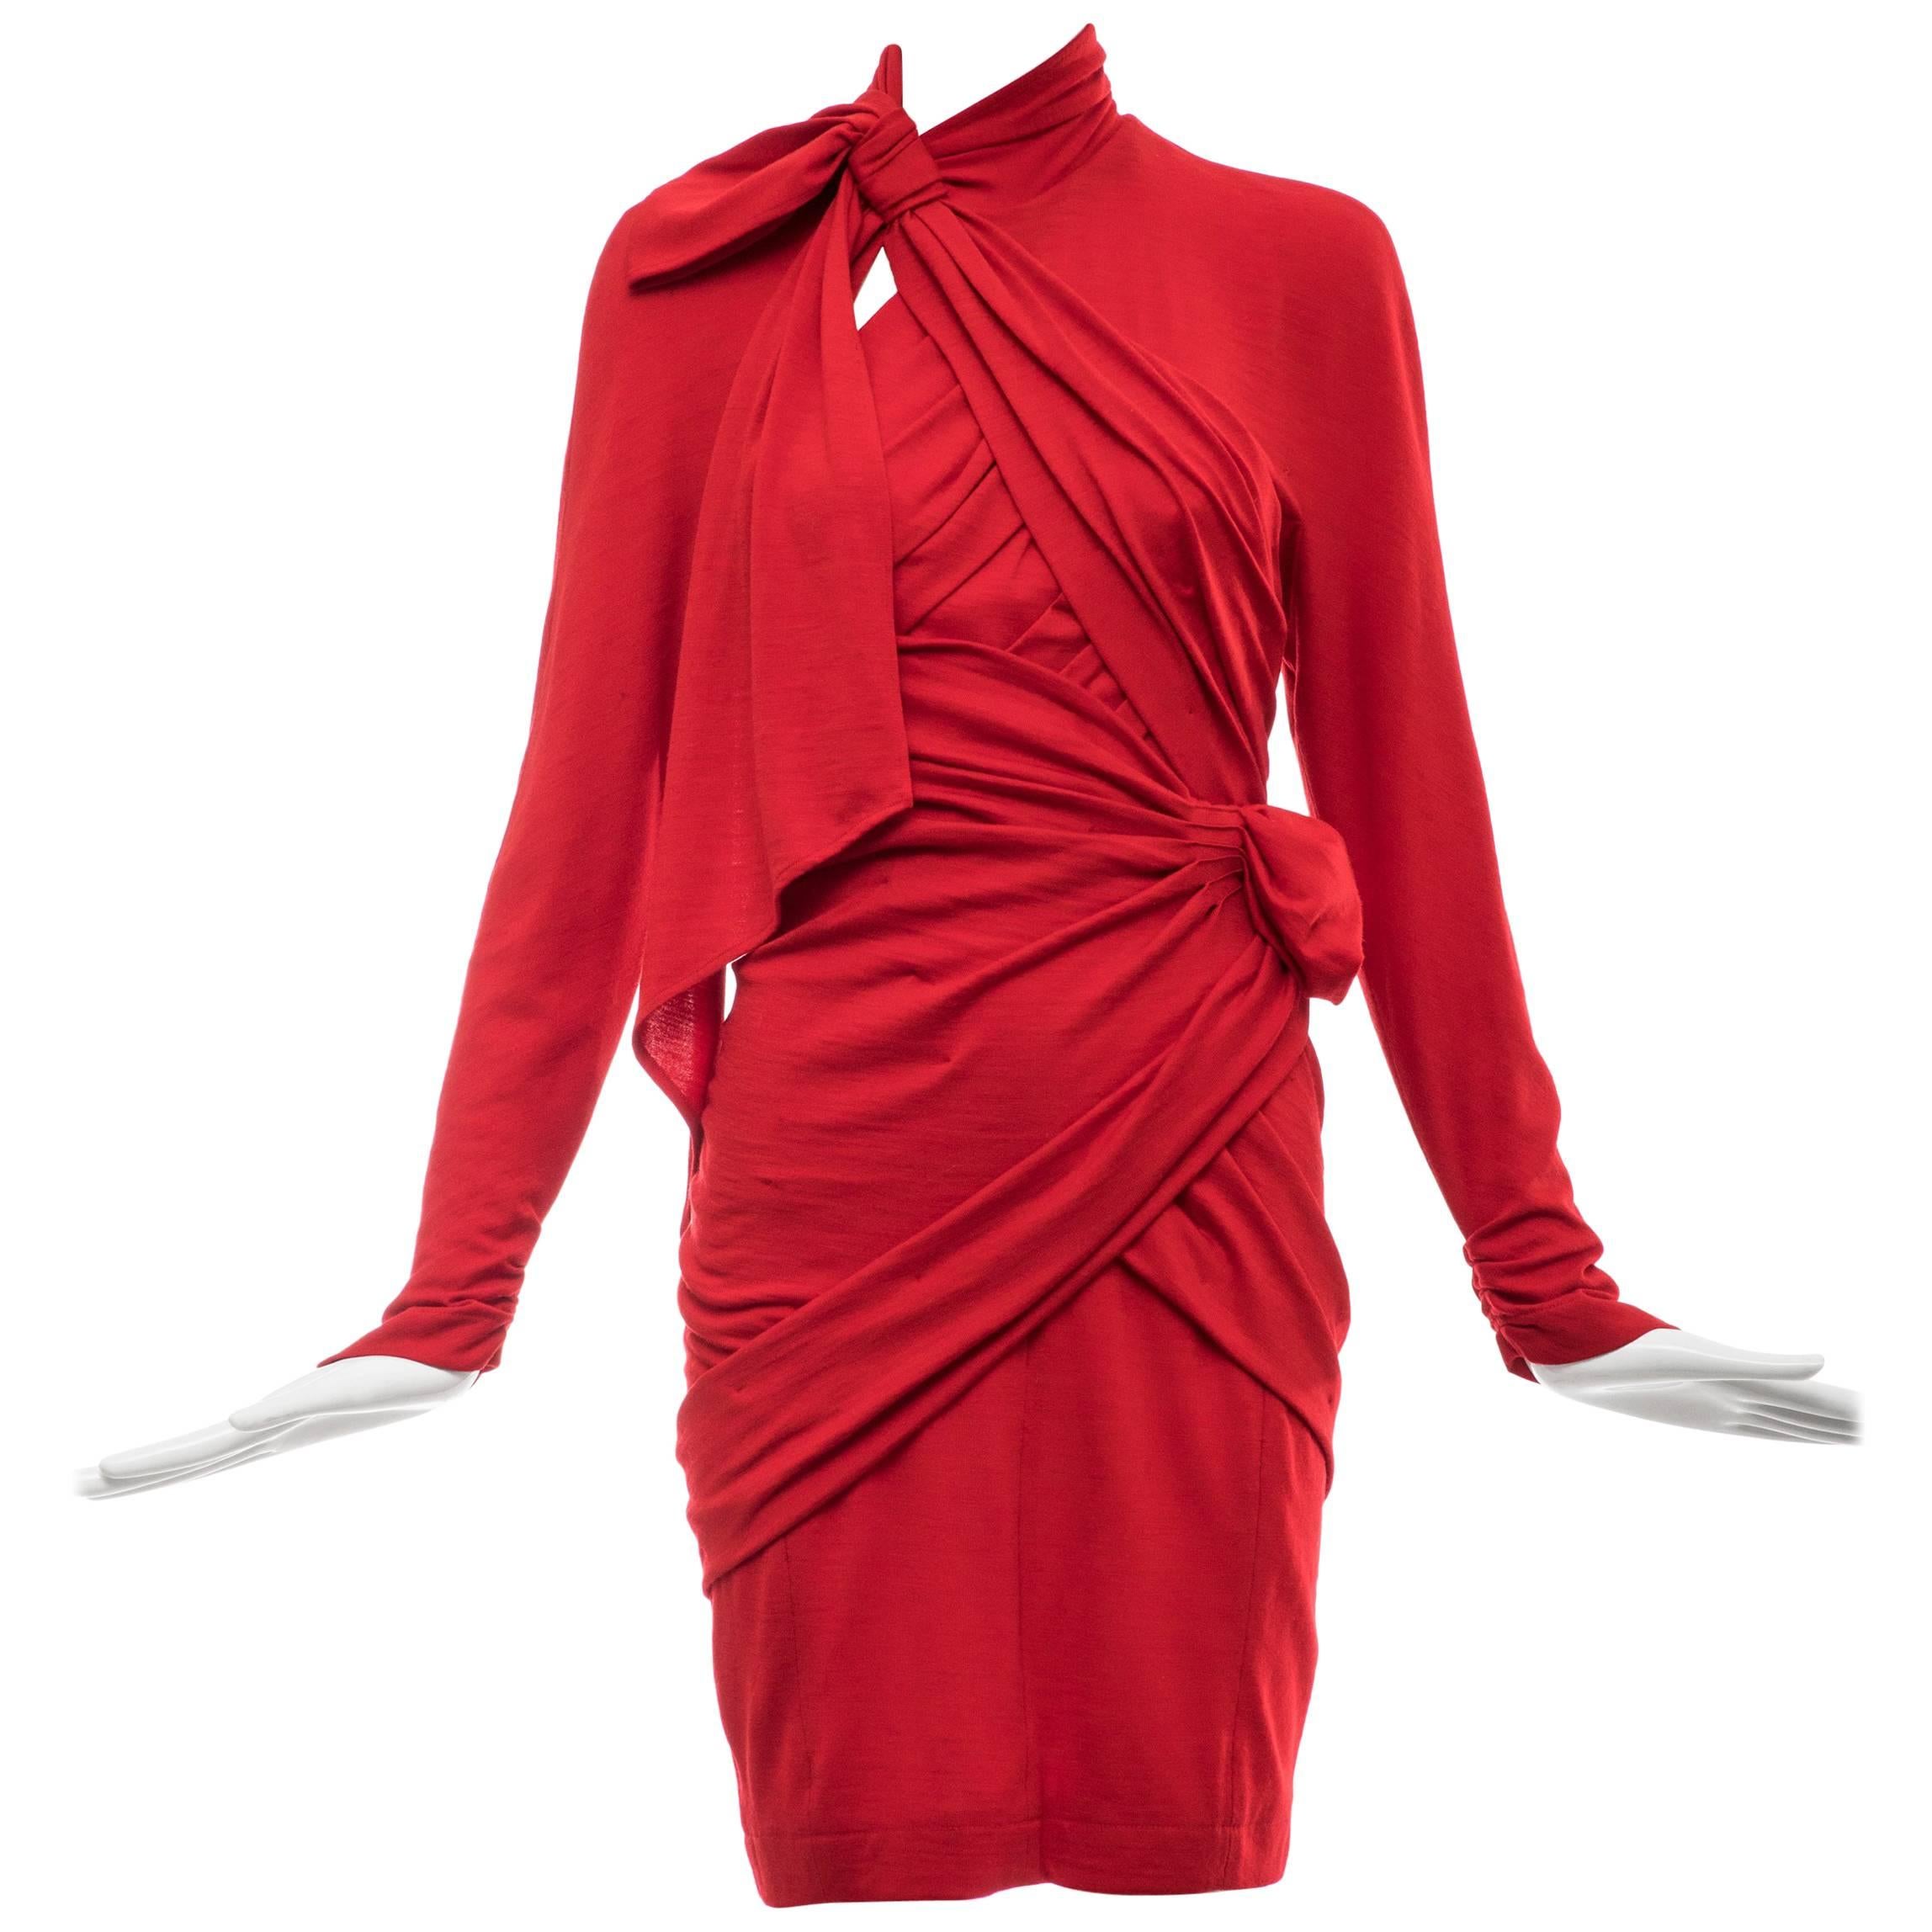 Thierry Mugler Red Wool Jersey Ruched Dress with Built-In-Corset, Circa: 1980's